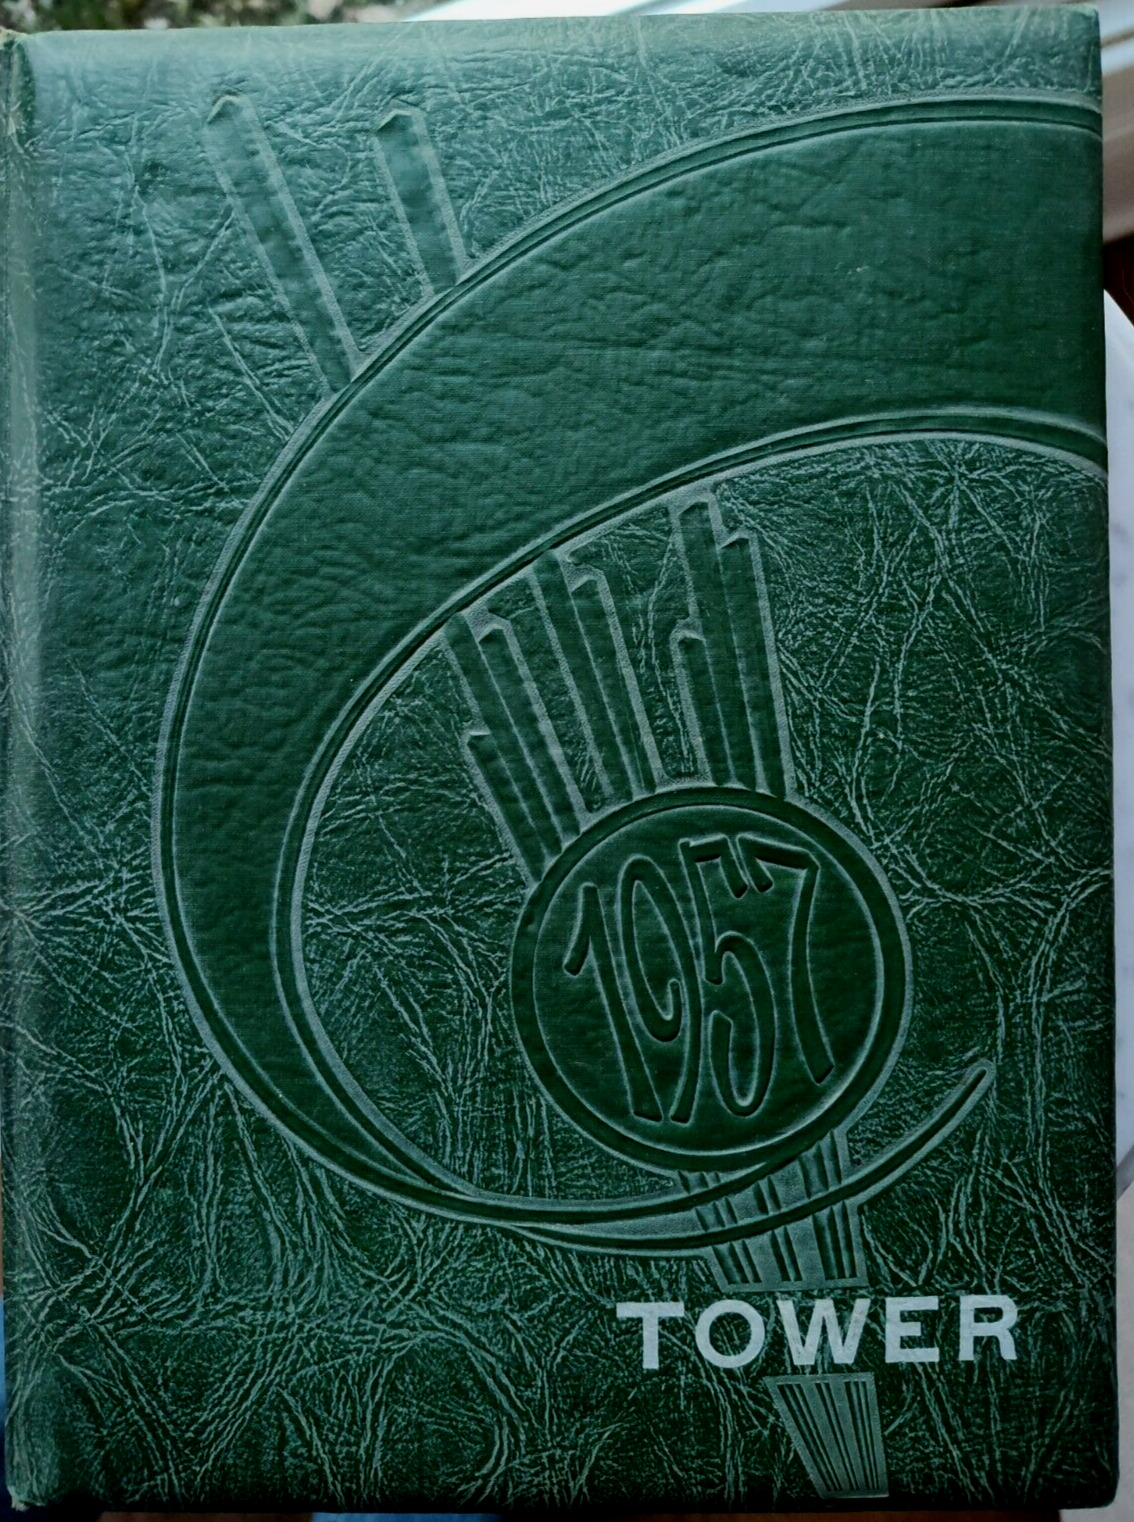 1957 Pavilion NY Central High School Yearbook Grades K- 12 THE TOWER